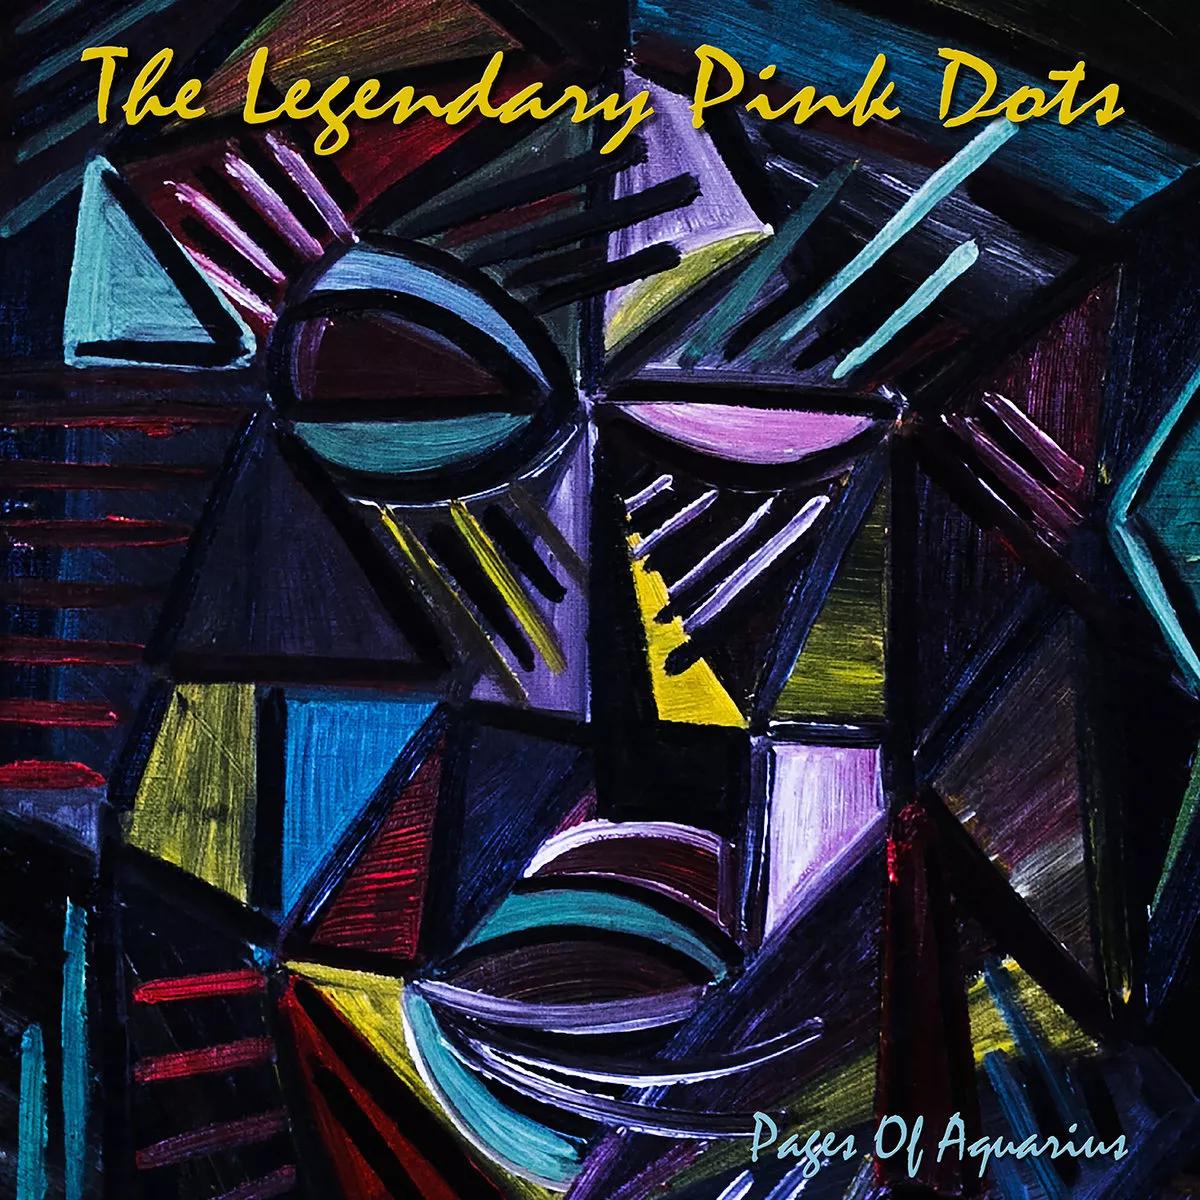 Pages Of Aquarius - The Legendary Pink Dots